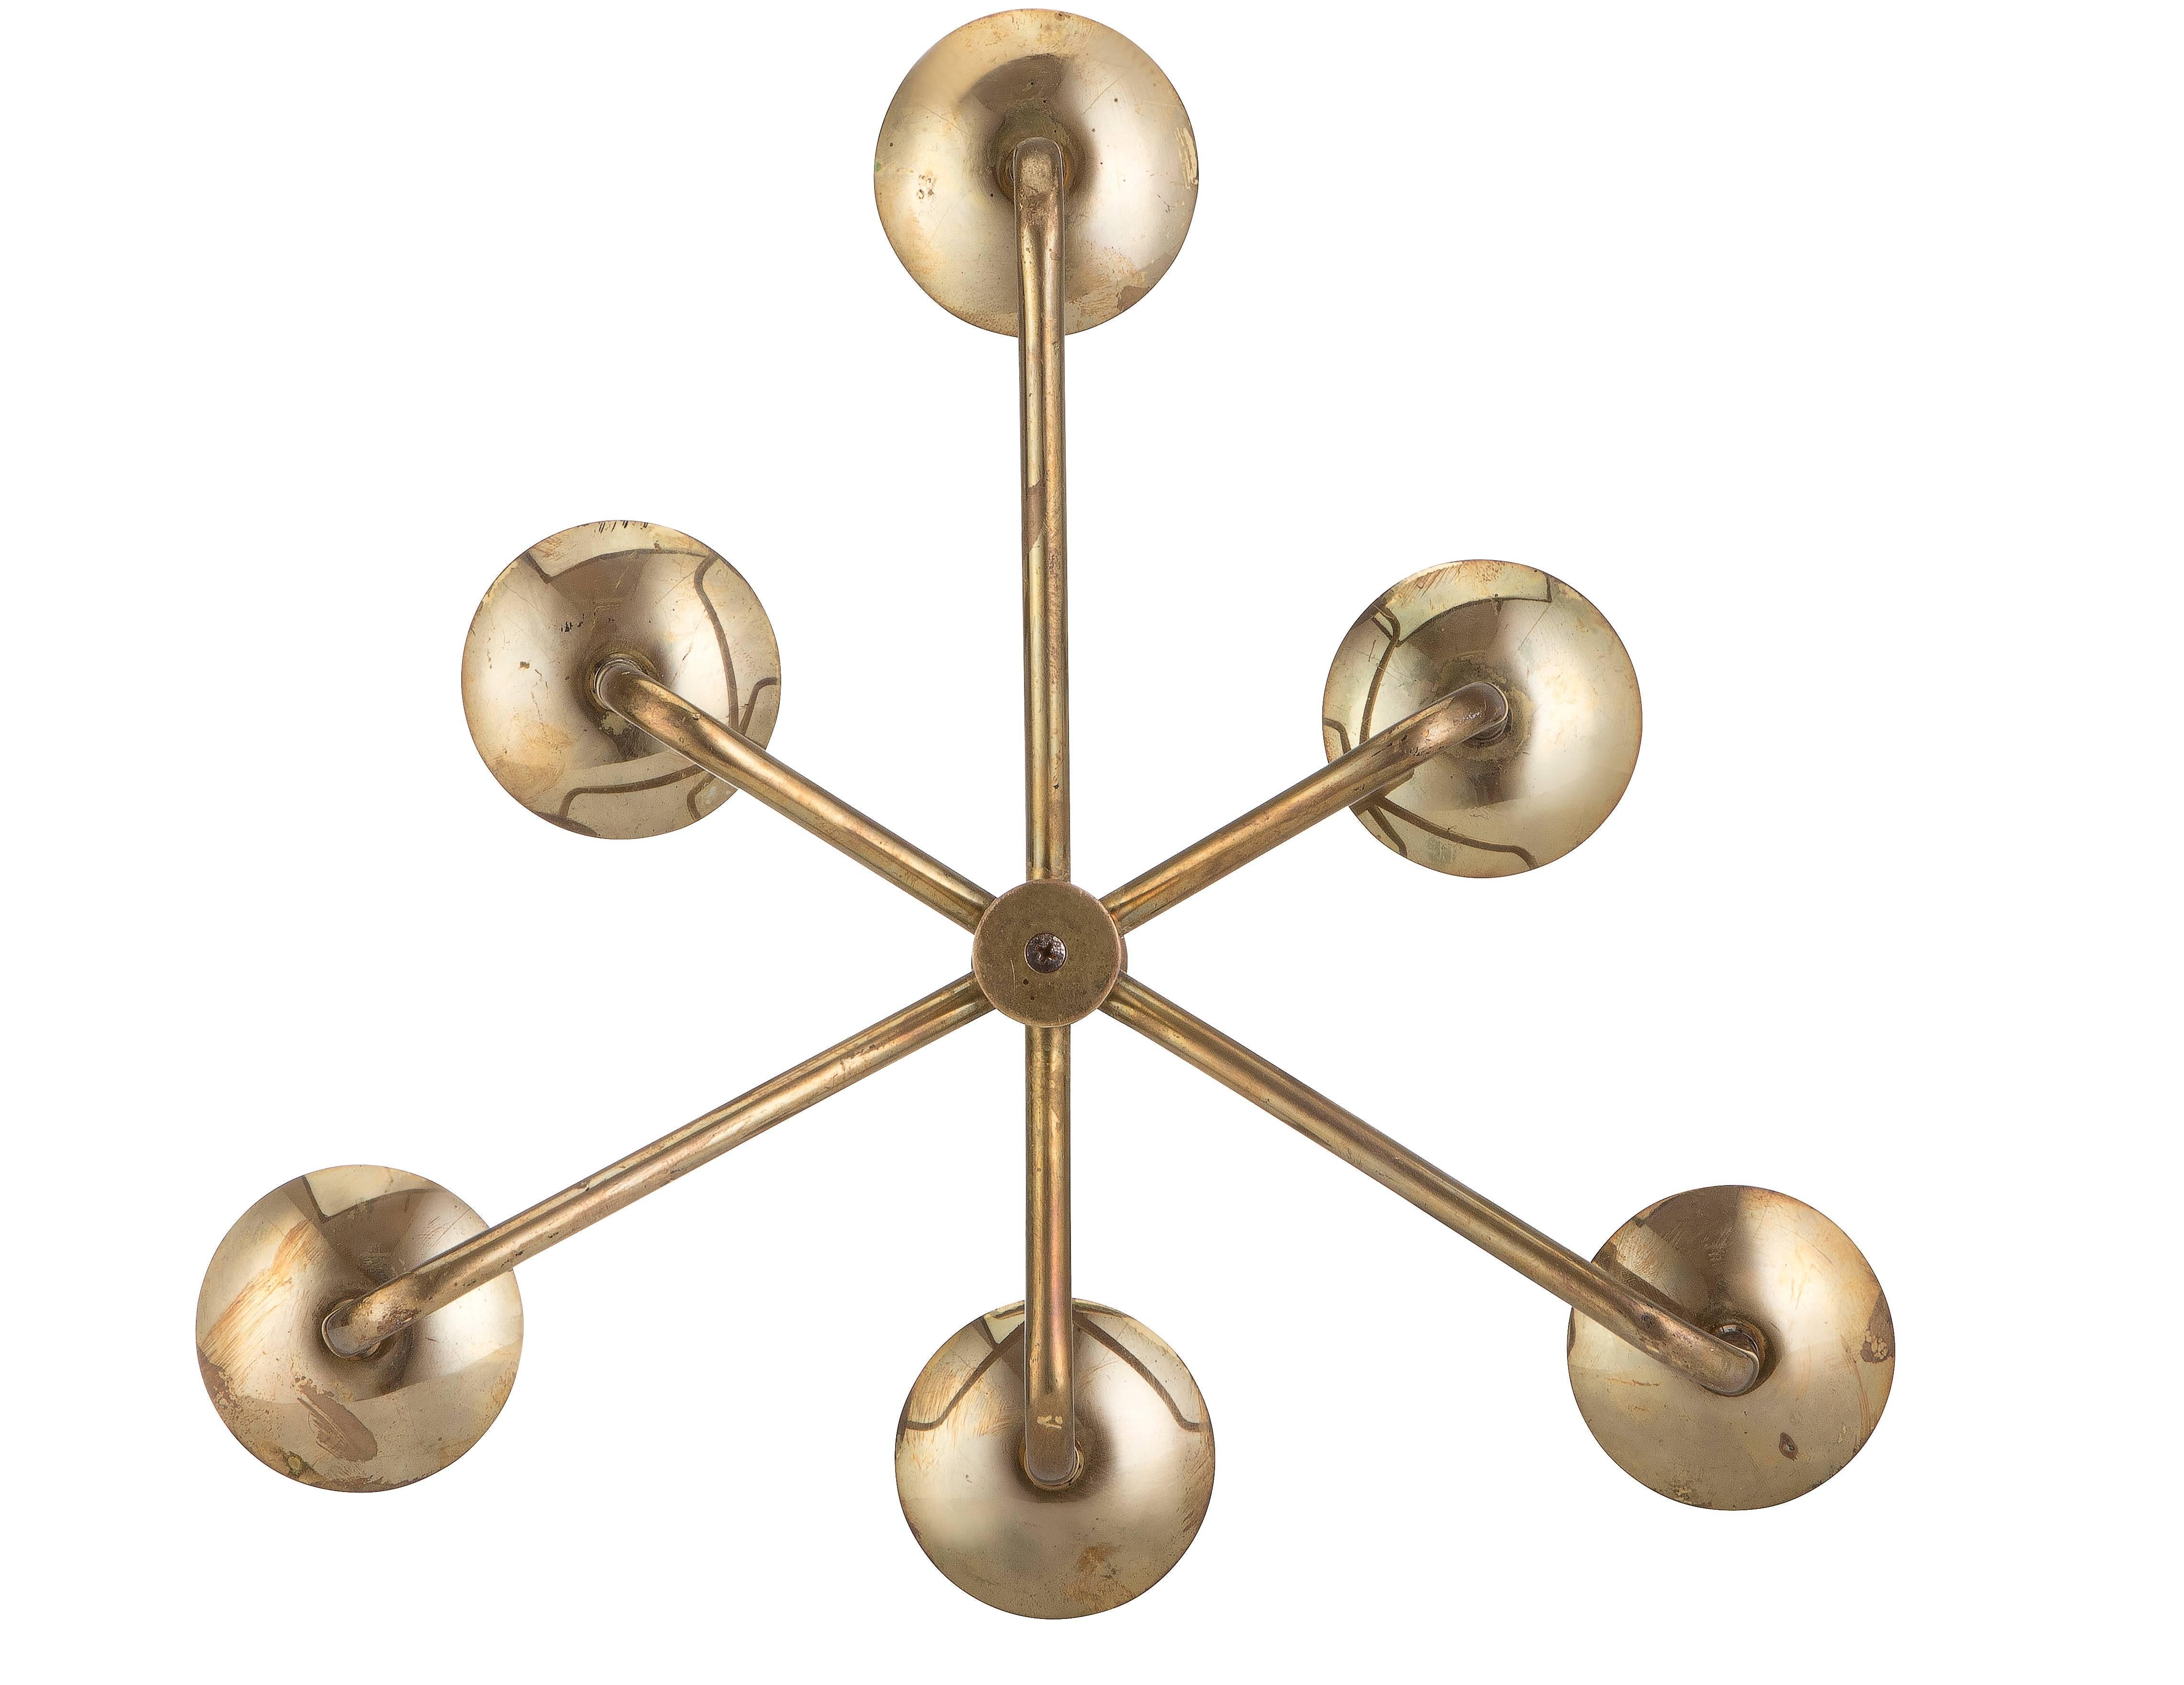 Six-arm brass chandelier in the style of Gaetano Sciolari features an unusual off-set arm pattern. The longer arms measure 18cm from the central column, the shorter arms at 13 cm.